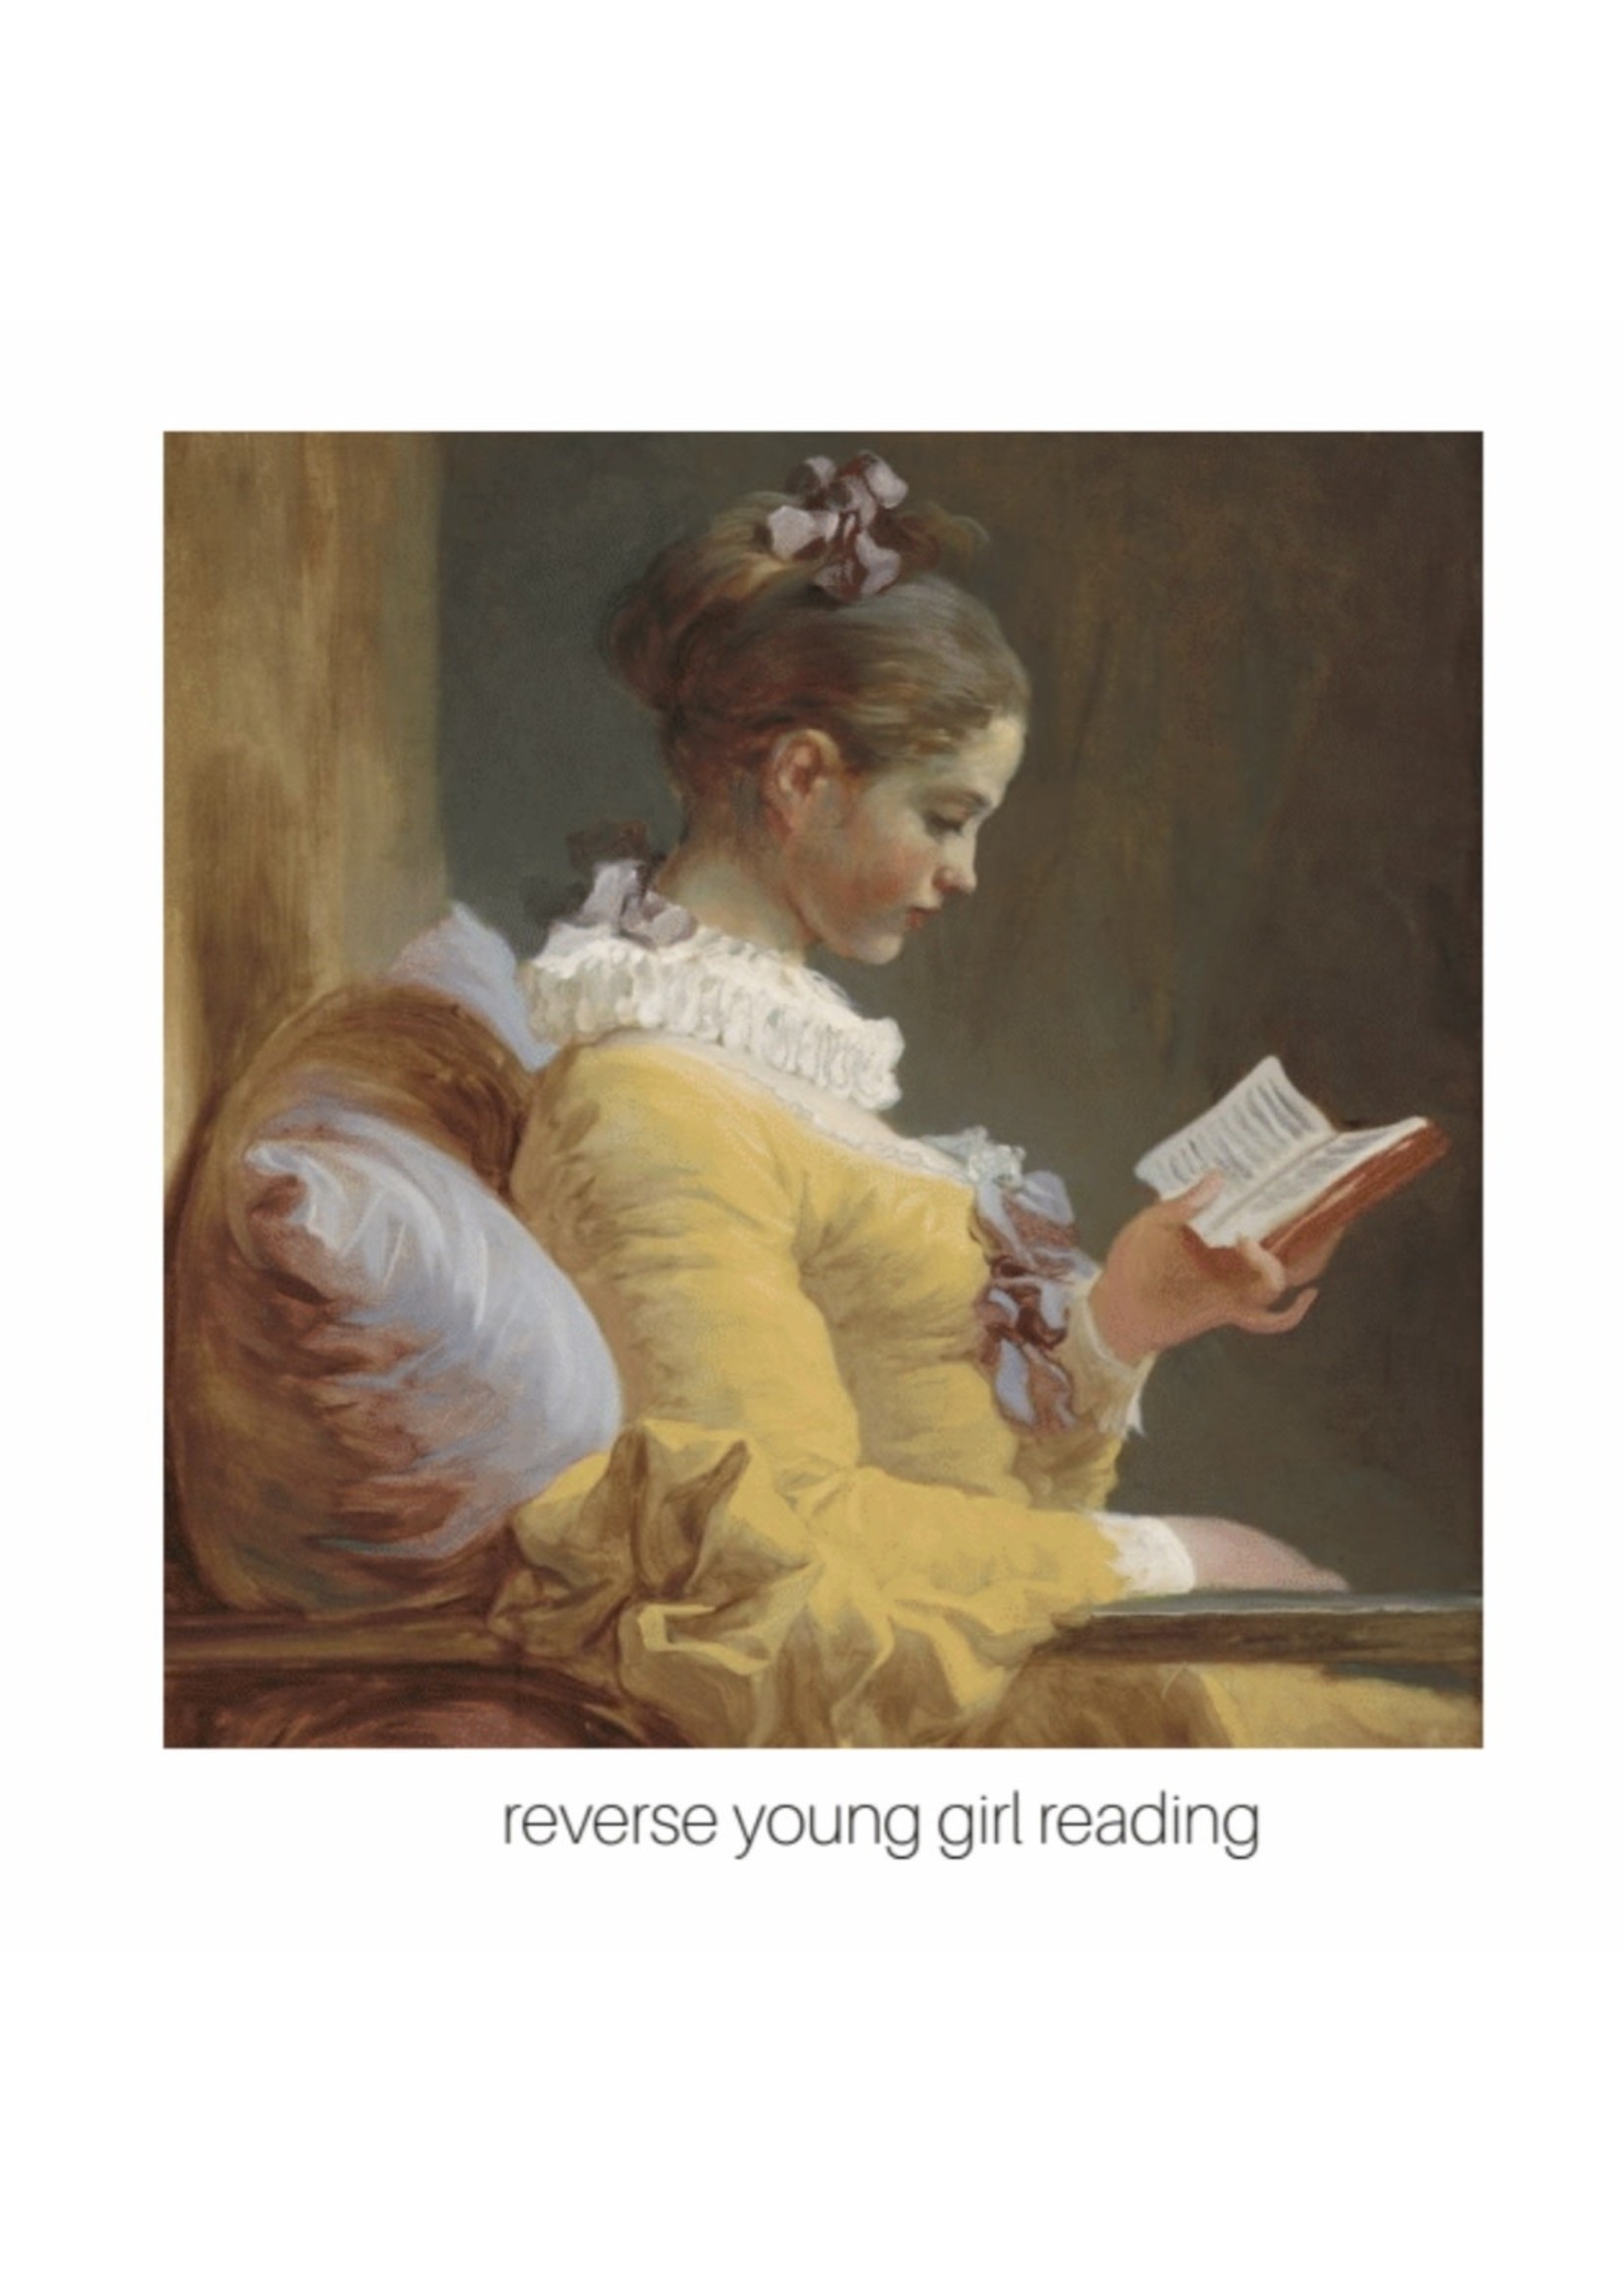 Mint by Michelle Reversed Young Girl Reading Decoupage Mint by Michelle